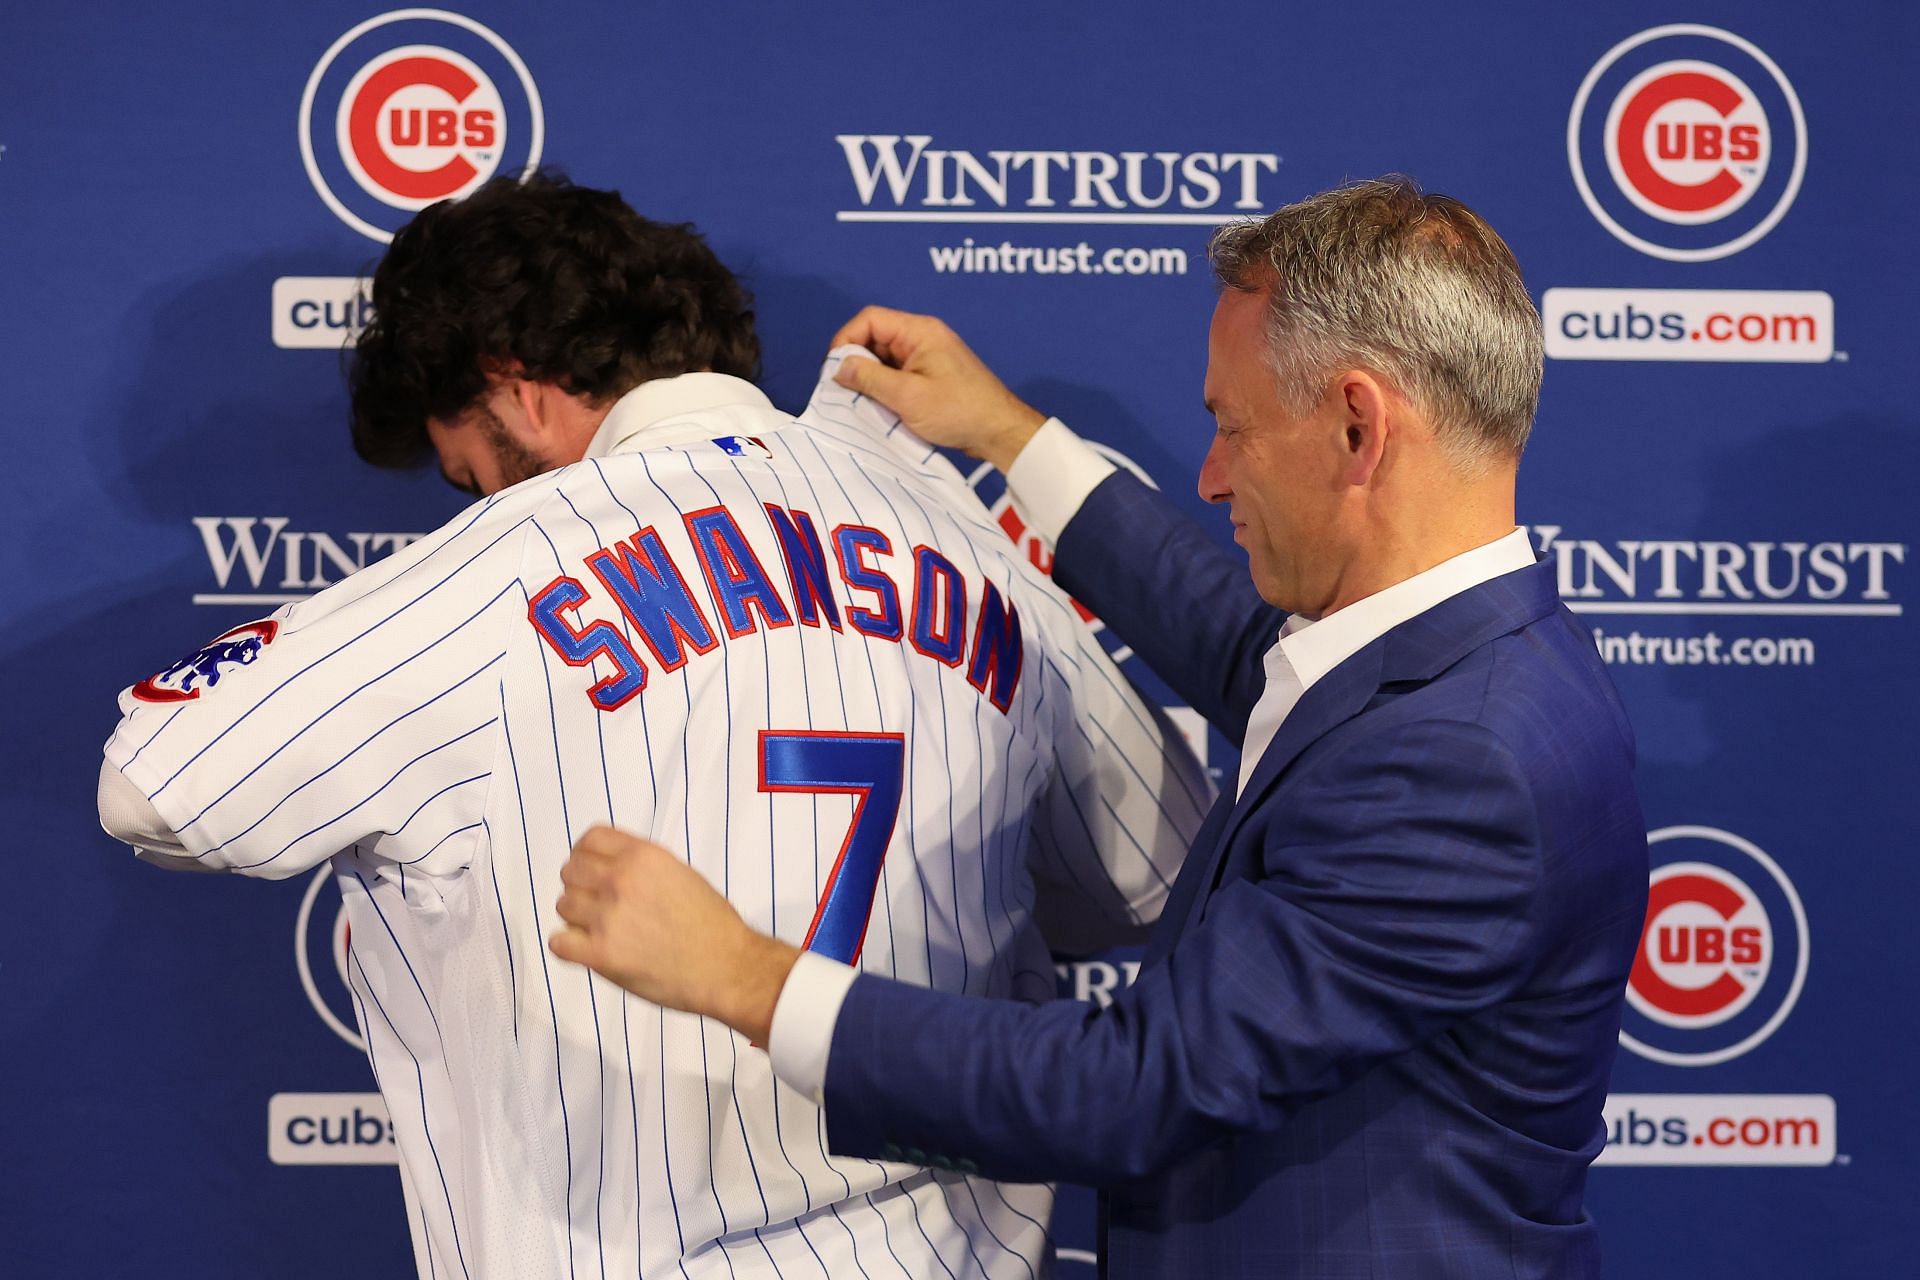 President Jed Hoyer of the Chicago Cubs presents a jersey to Dansby Swanson #7 during his introductory press conference